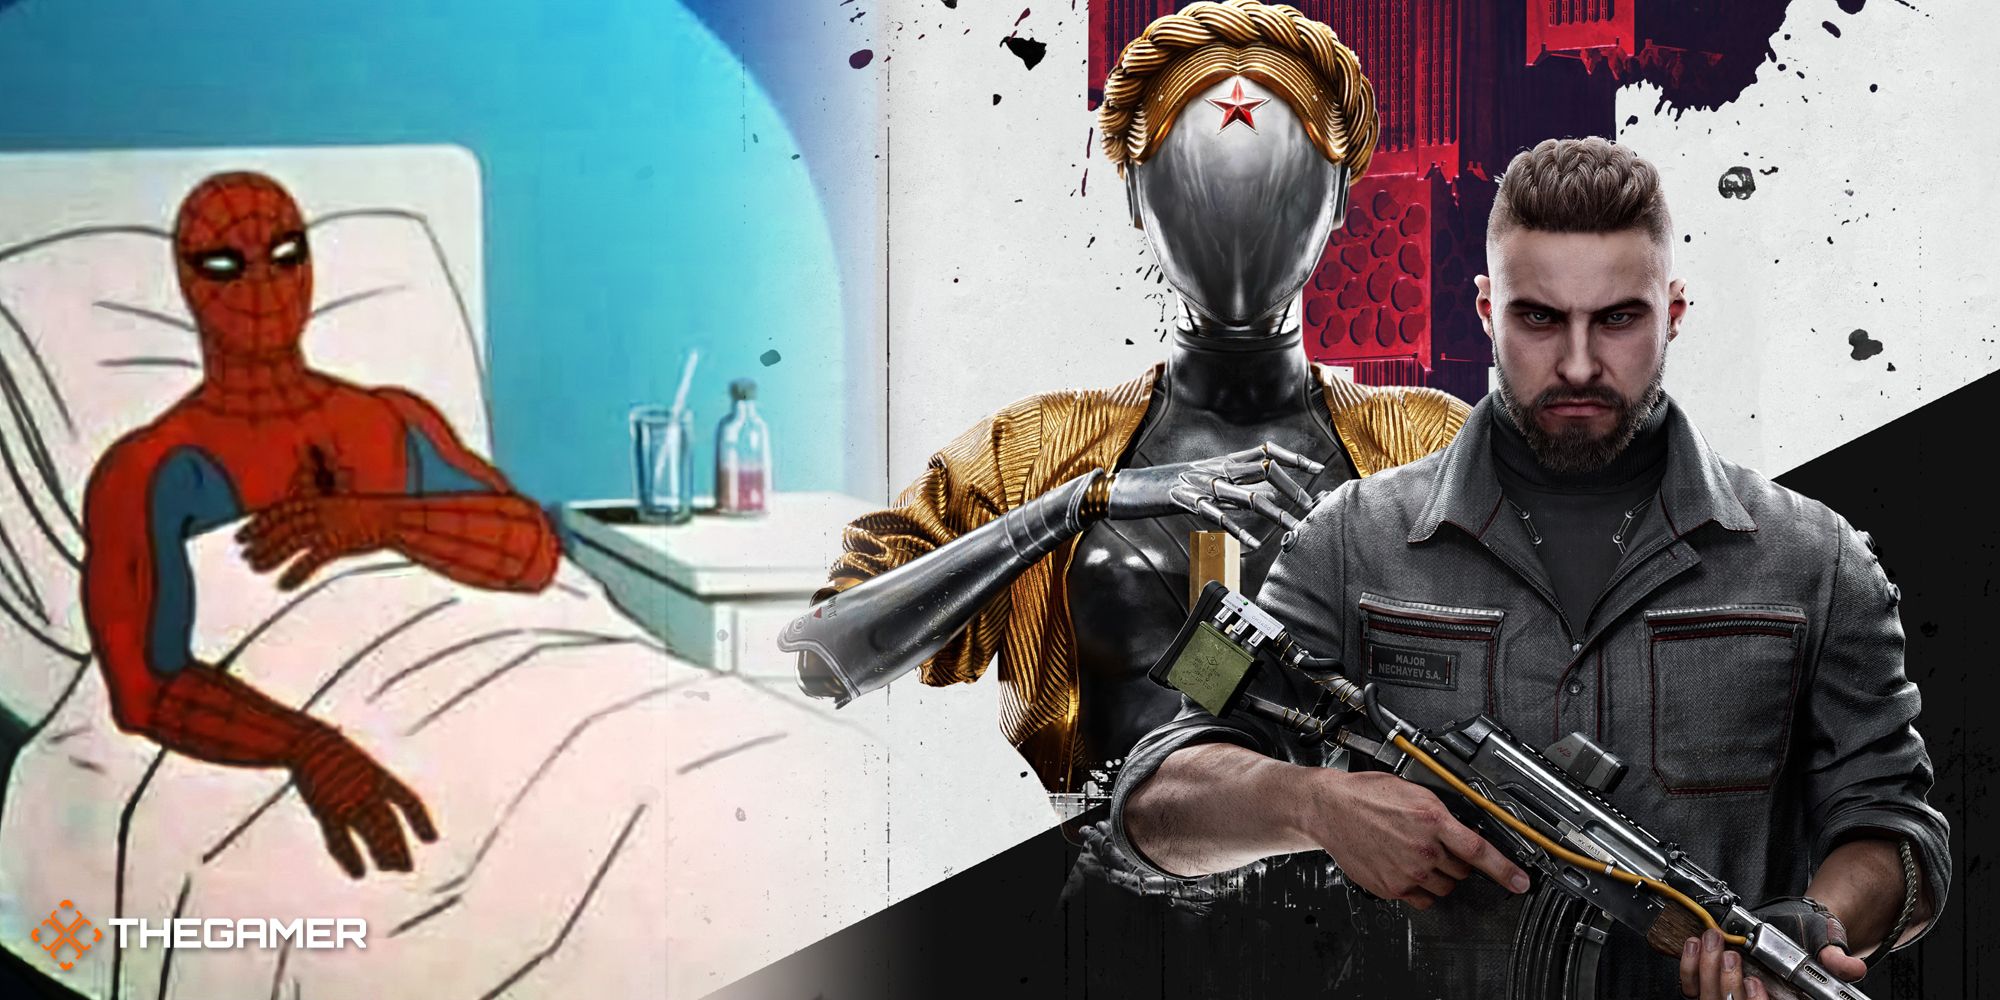 Spider-Man in a hospital bed on the left, Atomic Heart's box art on the right.